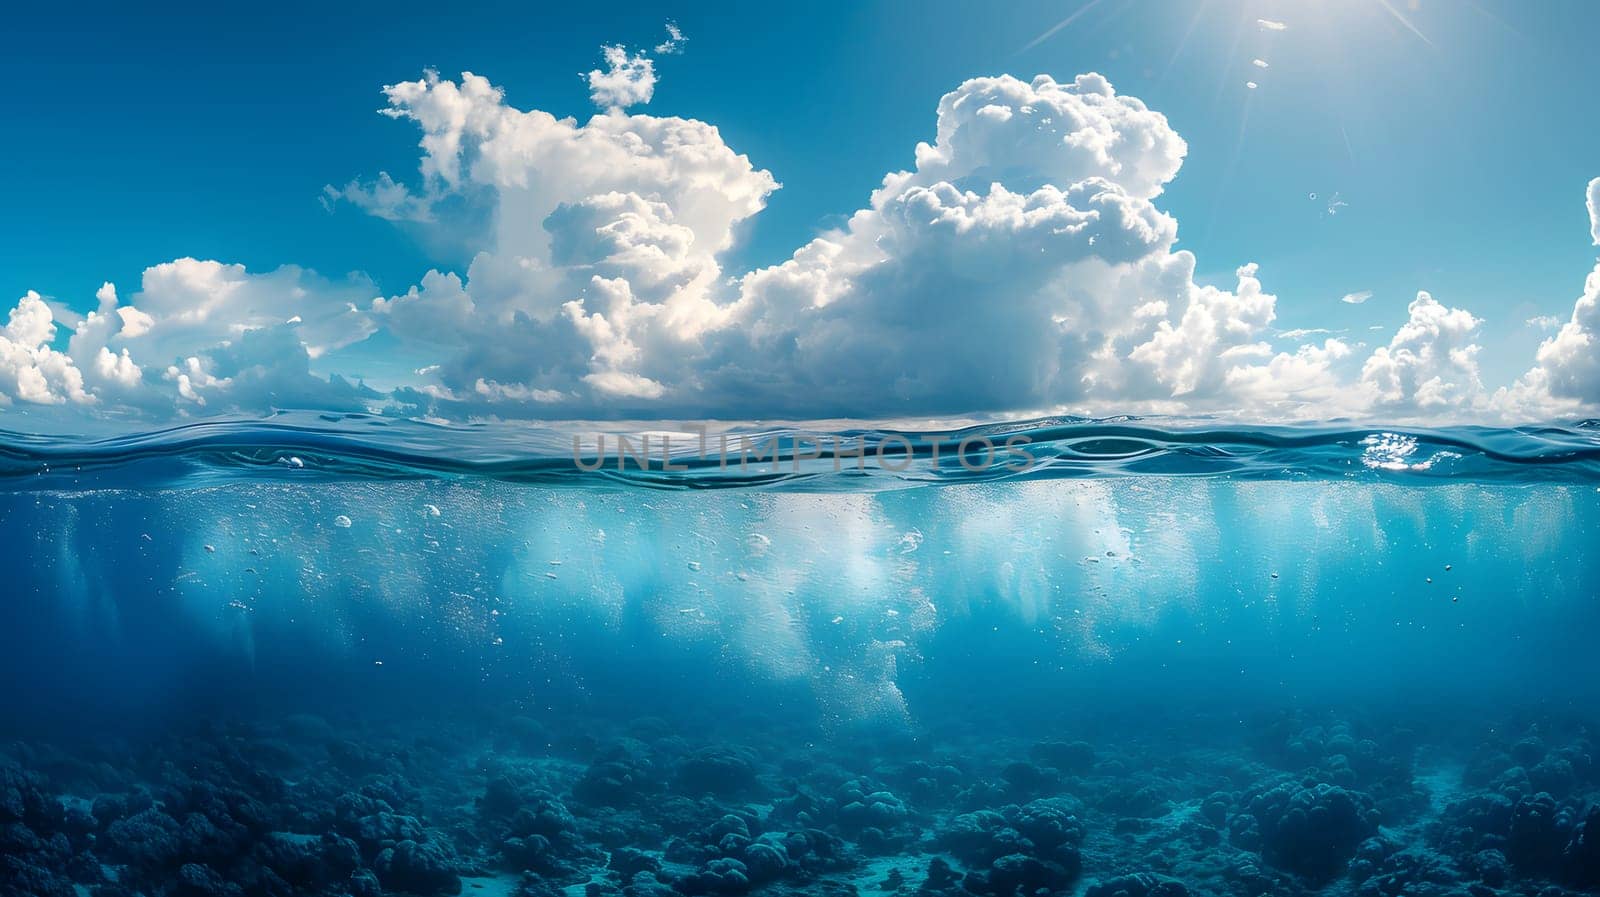 A mesmerizing half underwater view of a coral reef with fluffy clouds reflected in the aqua blue water, creating a dreamy natural landscape